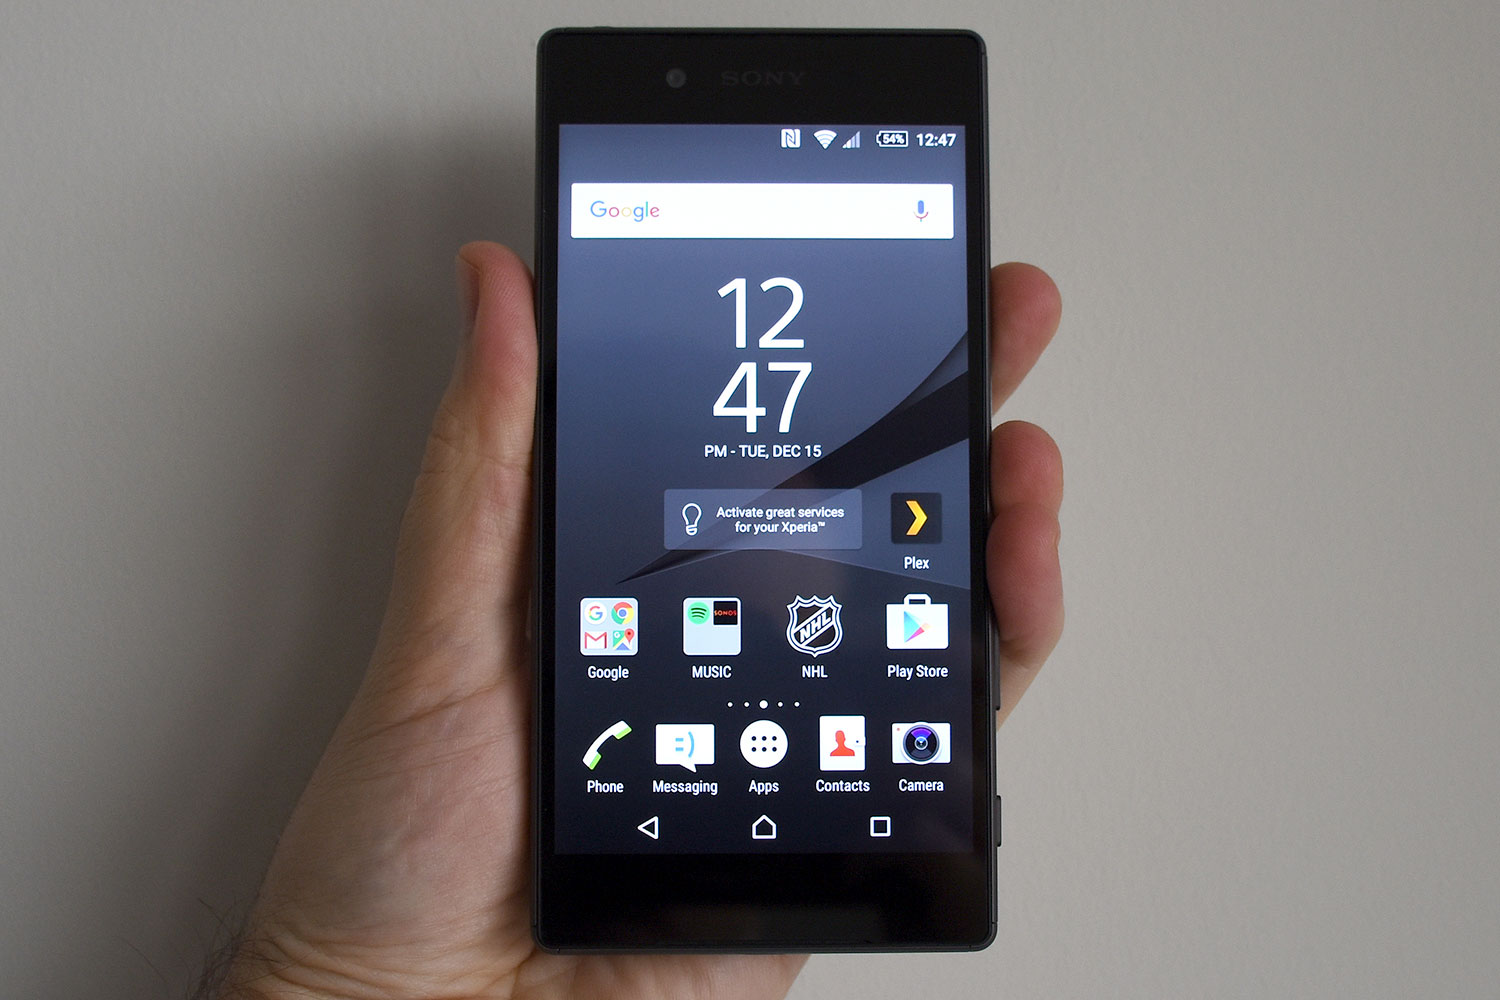 Ventileren Trouw Vier Sony Xperia Z5 | Full Review, Specs, Price, and More | Digital Trends